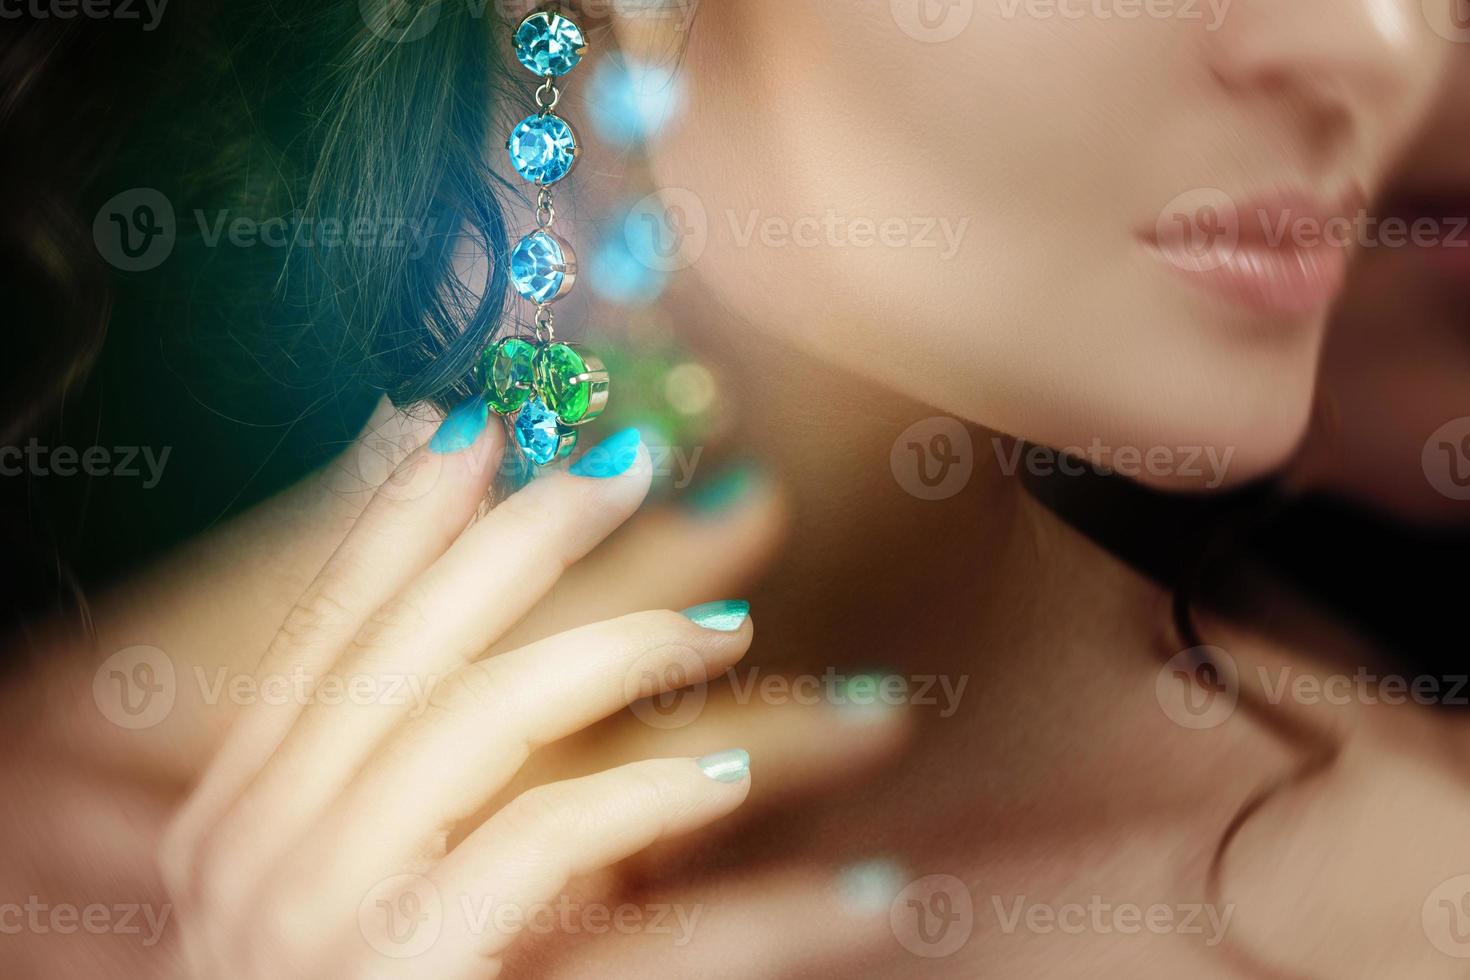 Woman wearing beautiful and expensive earrings photo